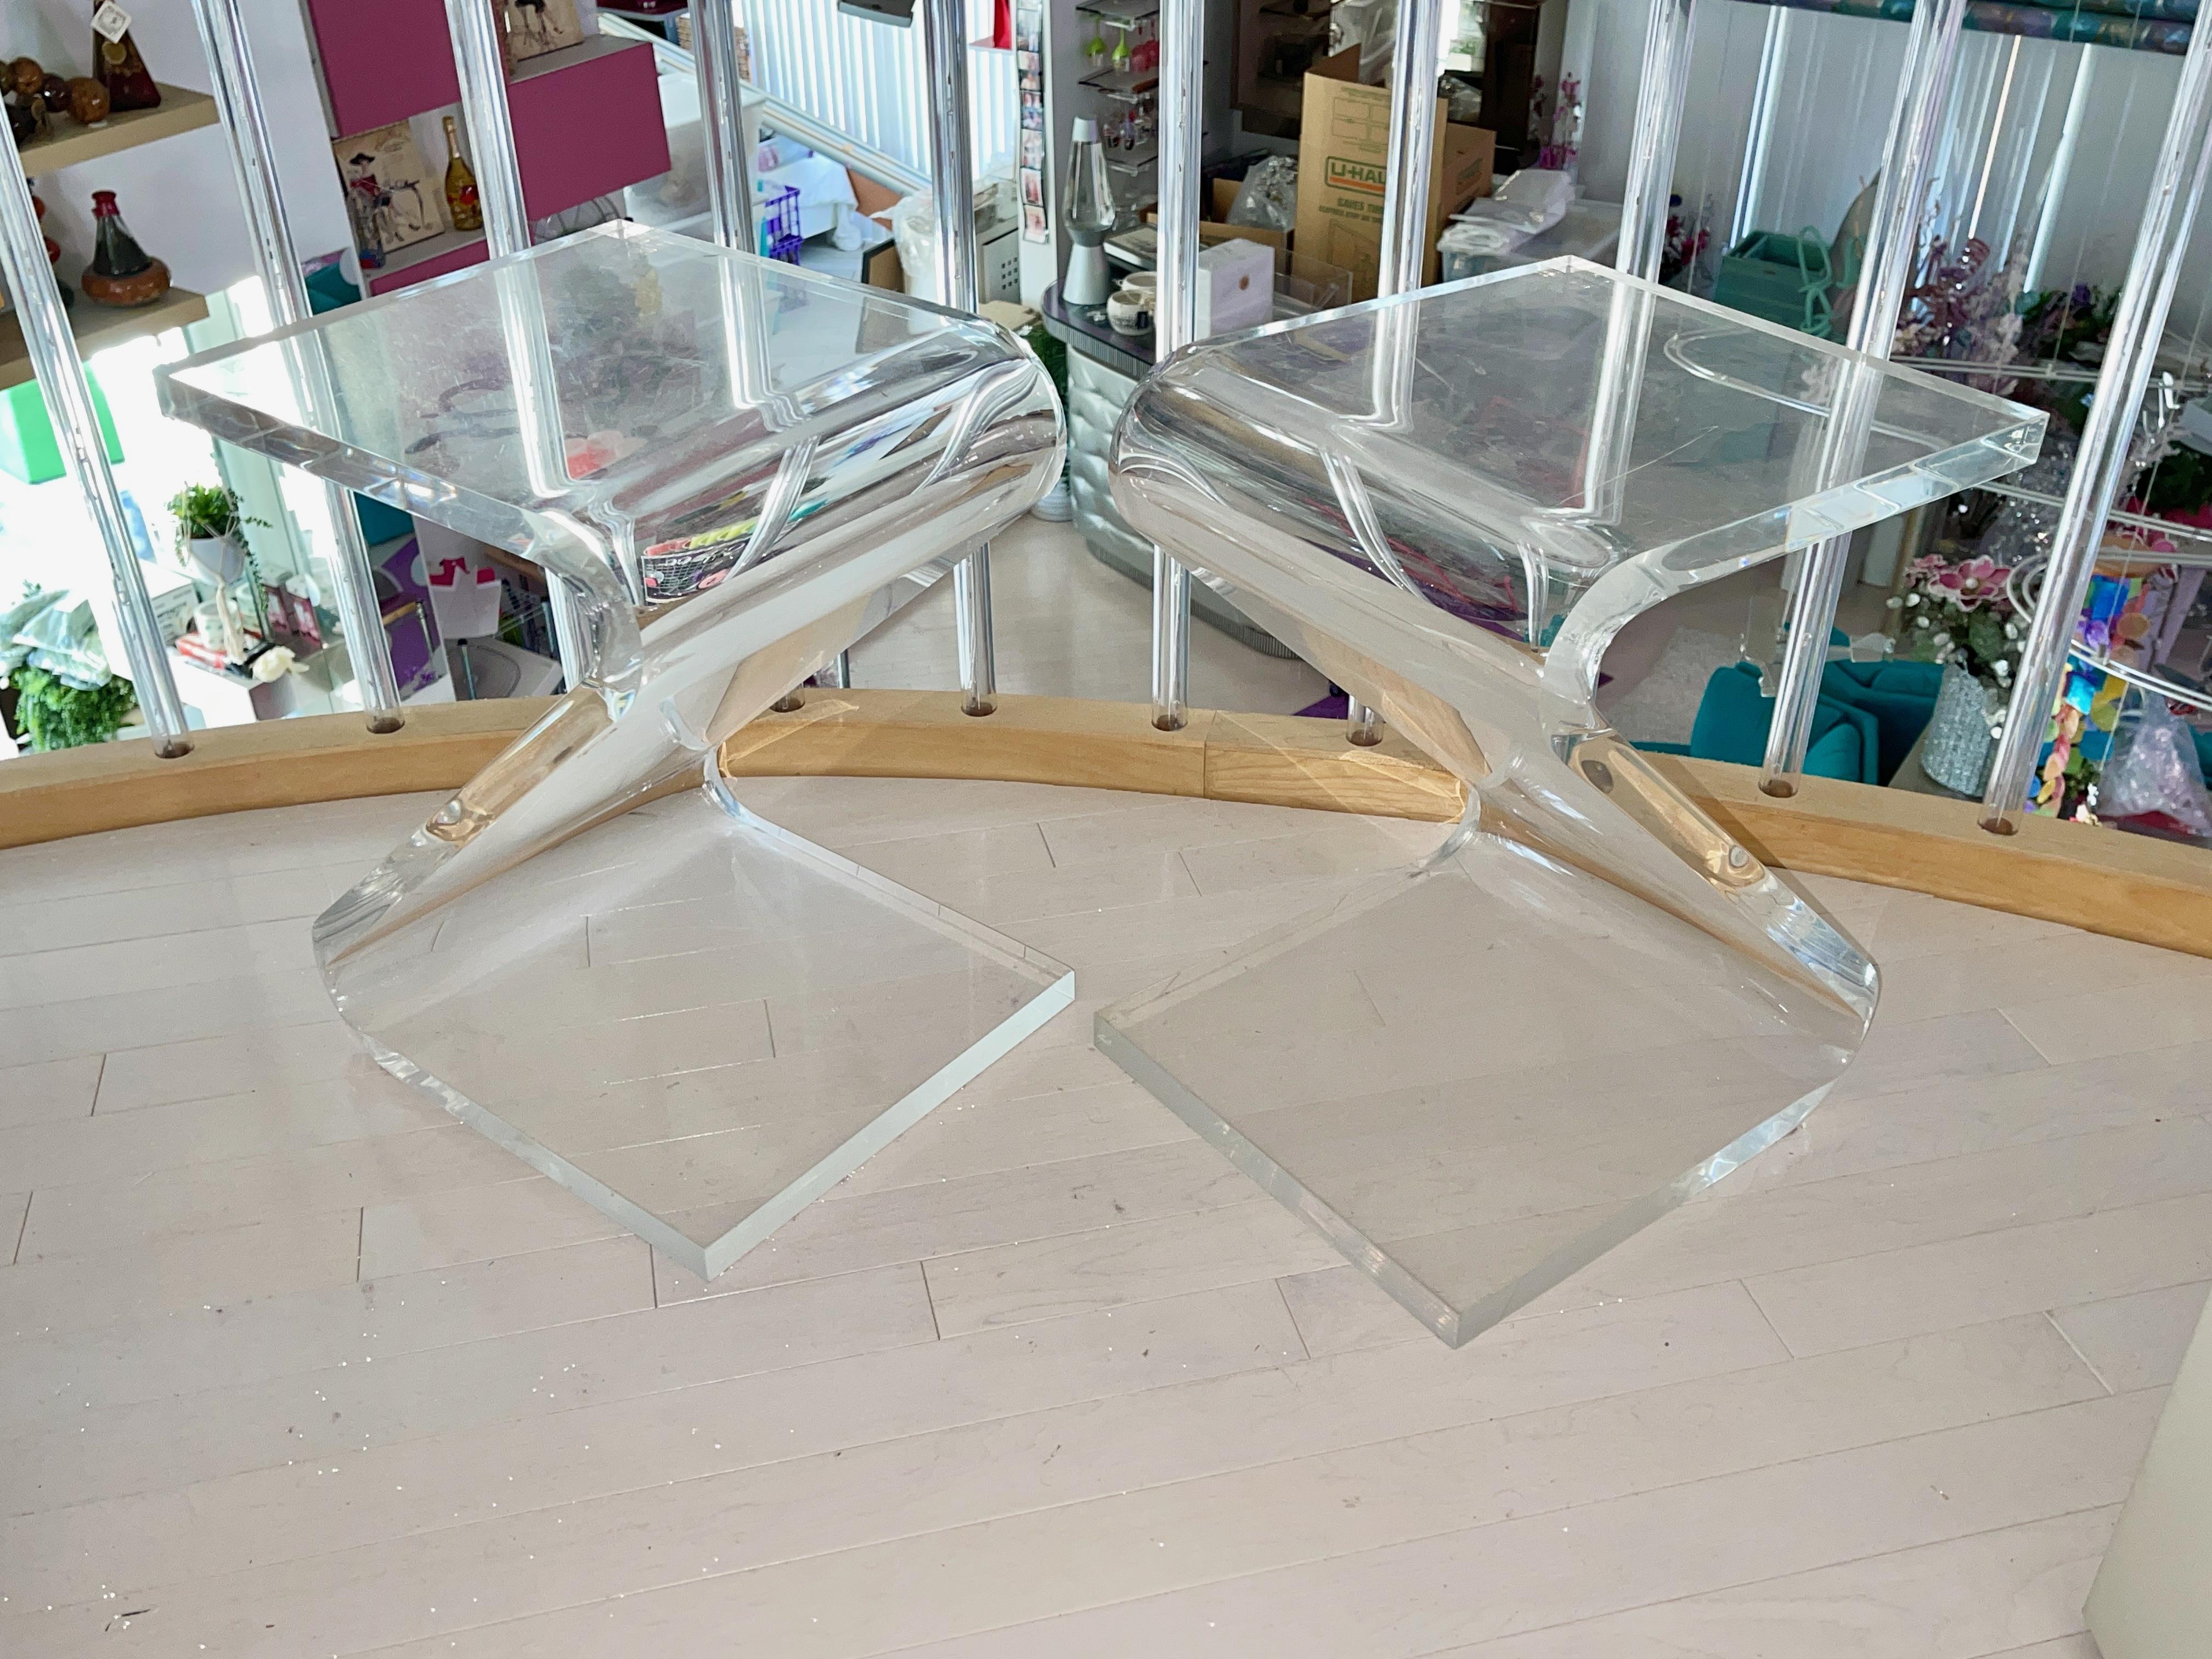 Vintage 1970’s inch thick formed Lucite Z shaped telephone tables by John Mascheroni.
Technically Plexiglas as that is what Mascheroni preferred.
Often copied; never duplicated.
Very clean.

Price is per table